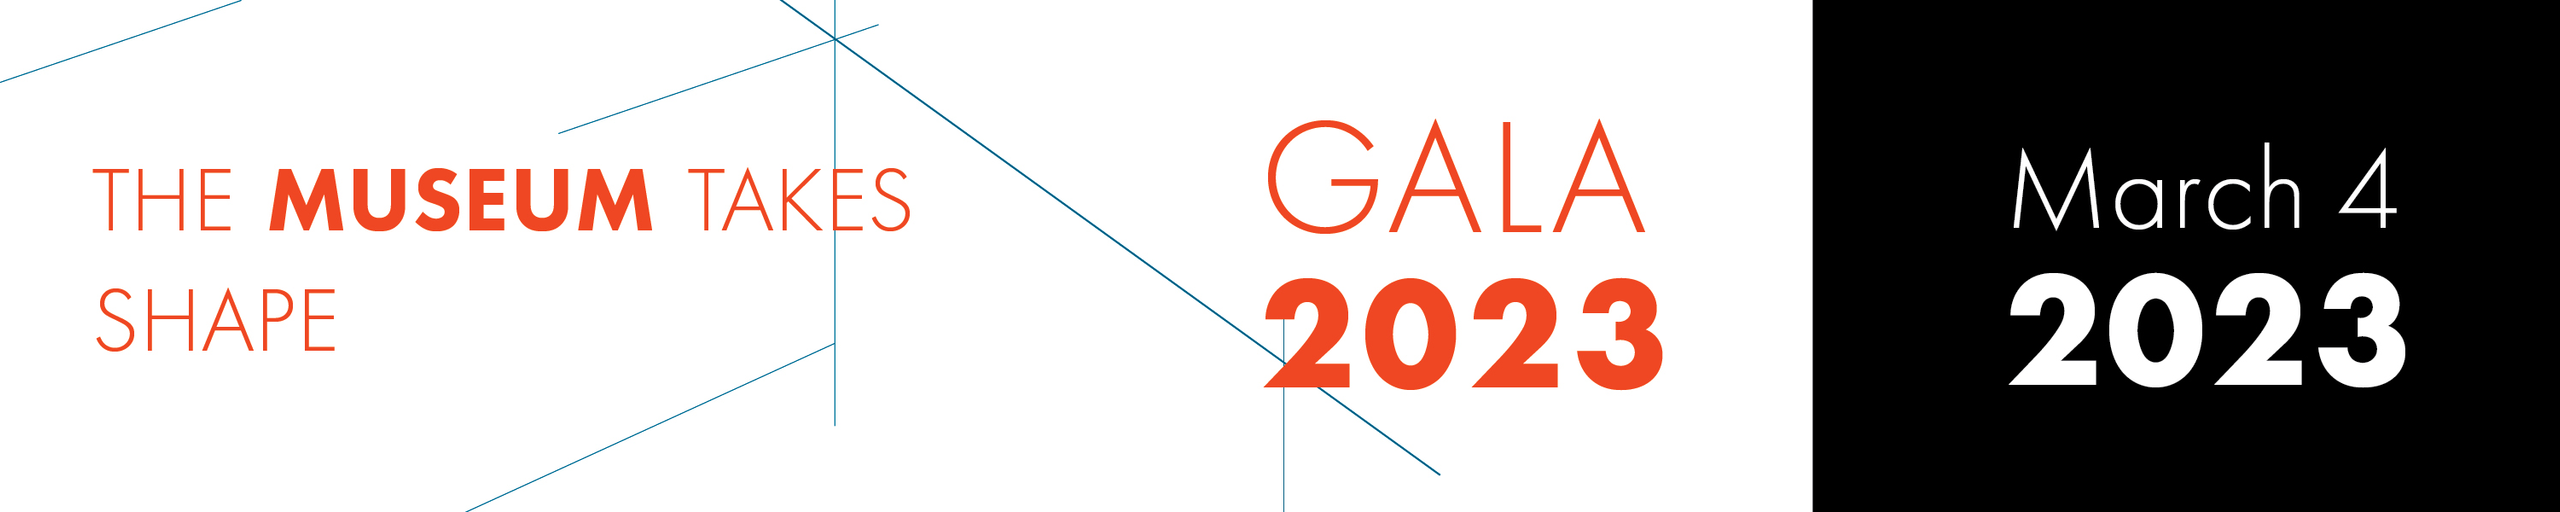 The museum takes shape, gala March 4, 2023.